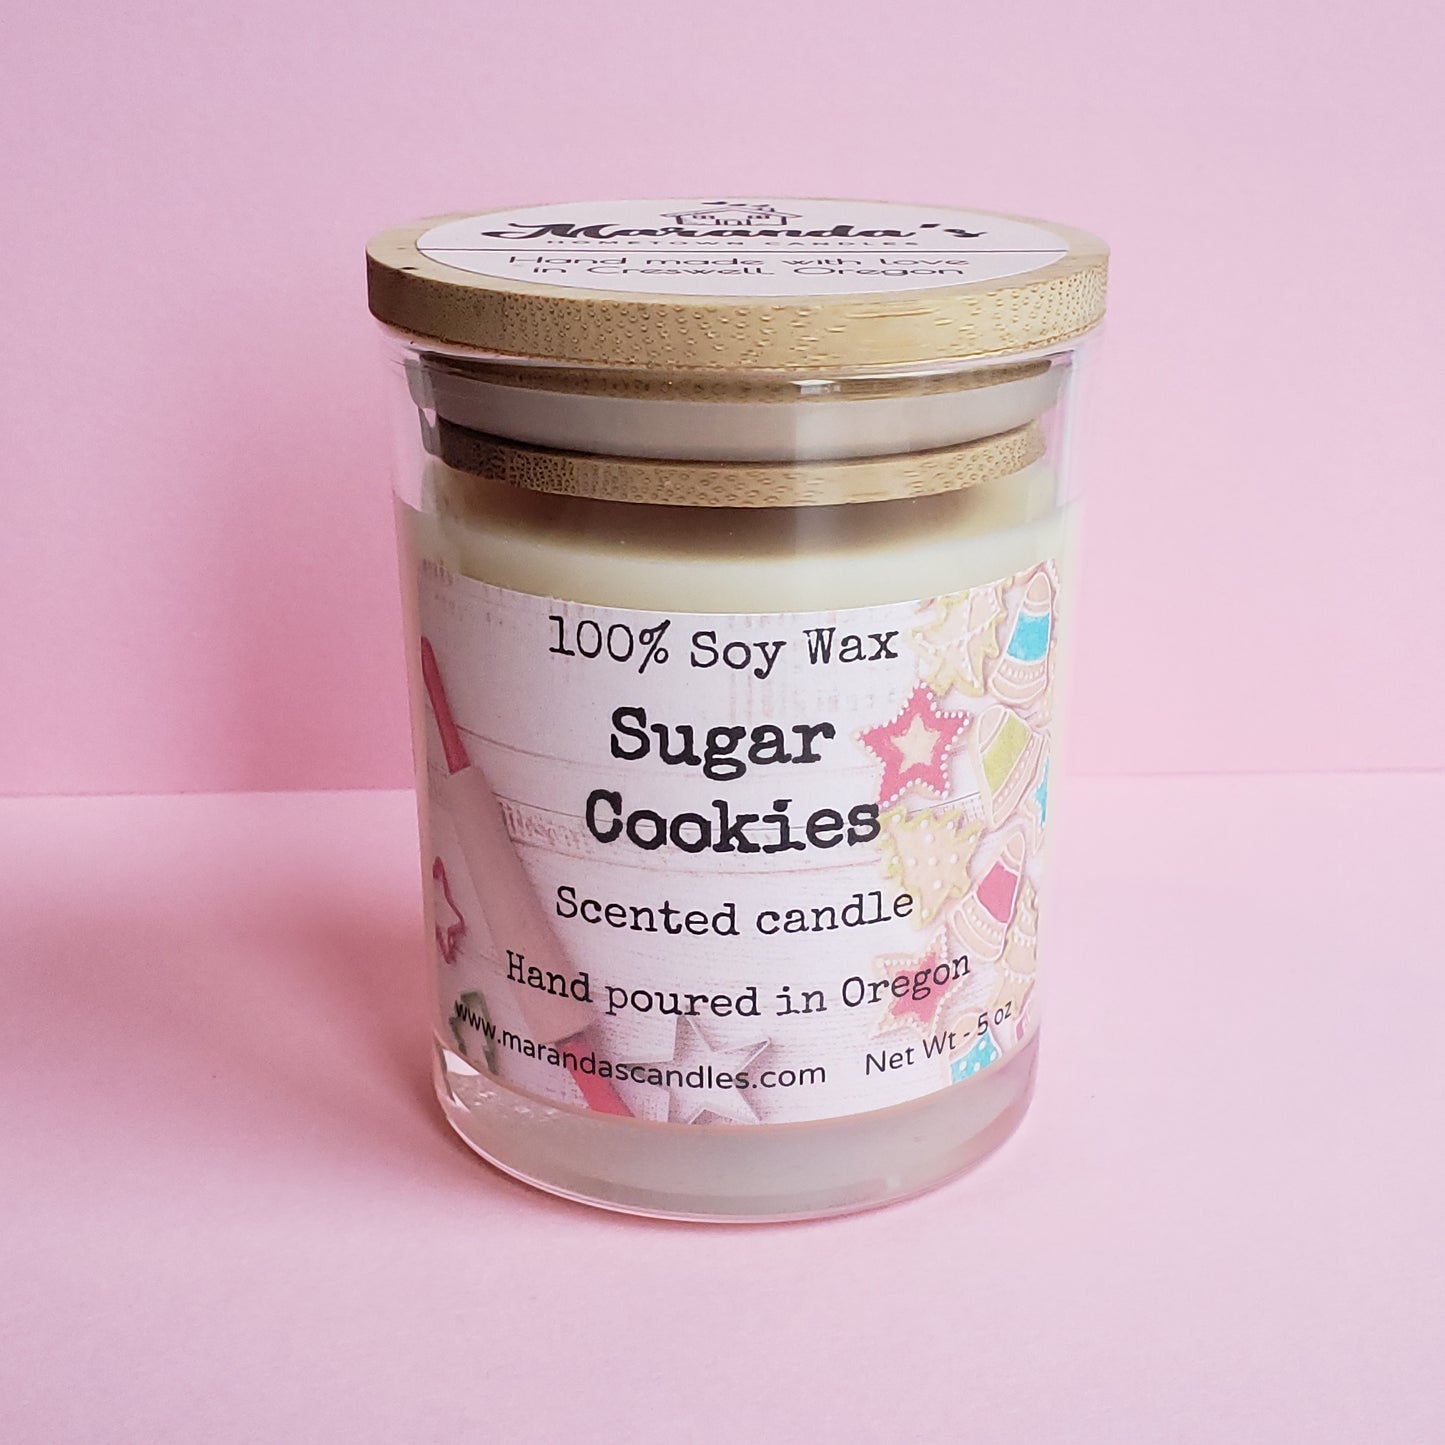 Sugar cookies Scented Soy Wax Candle/Wax melts